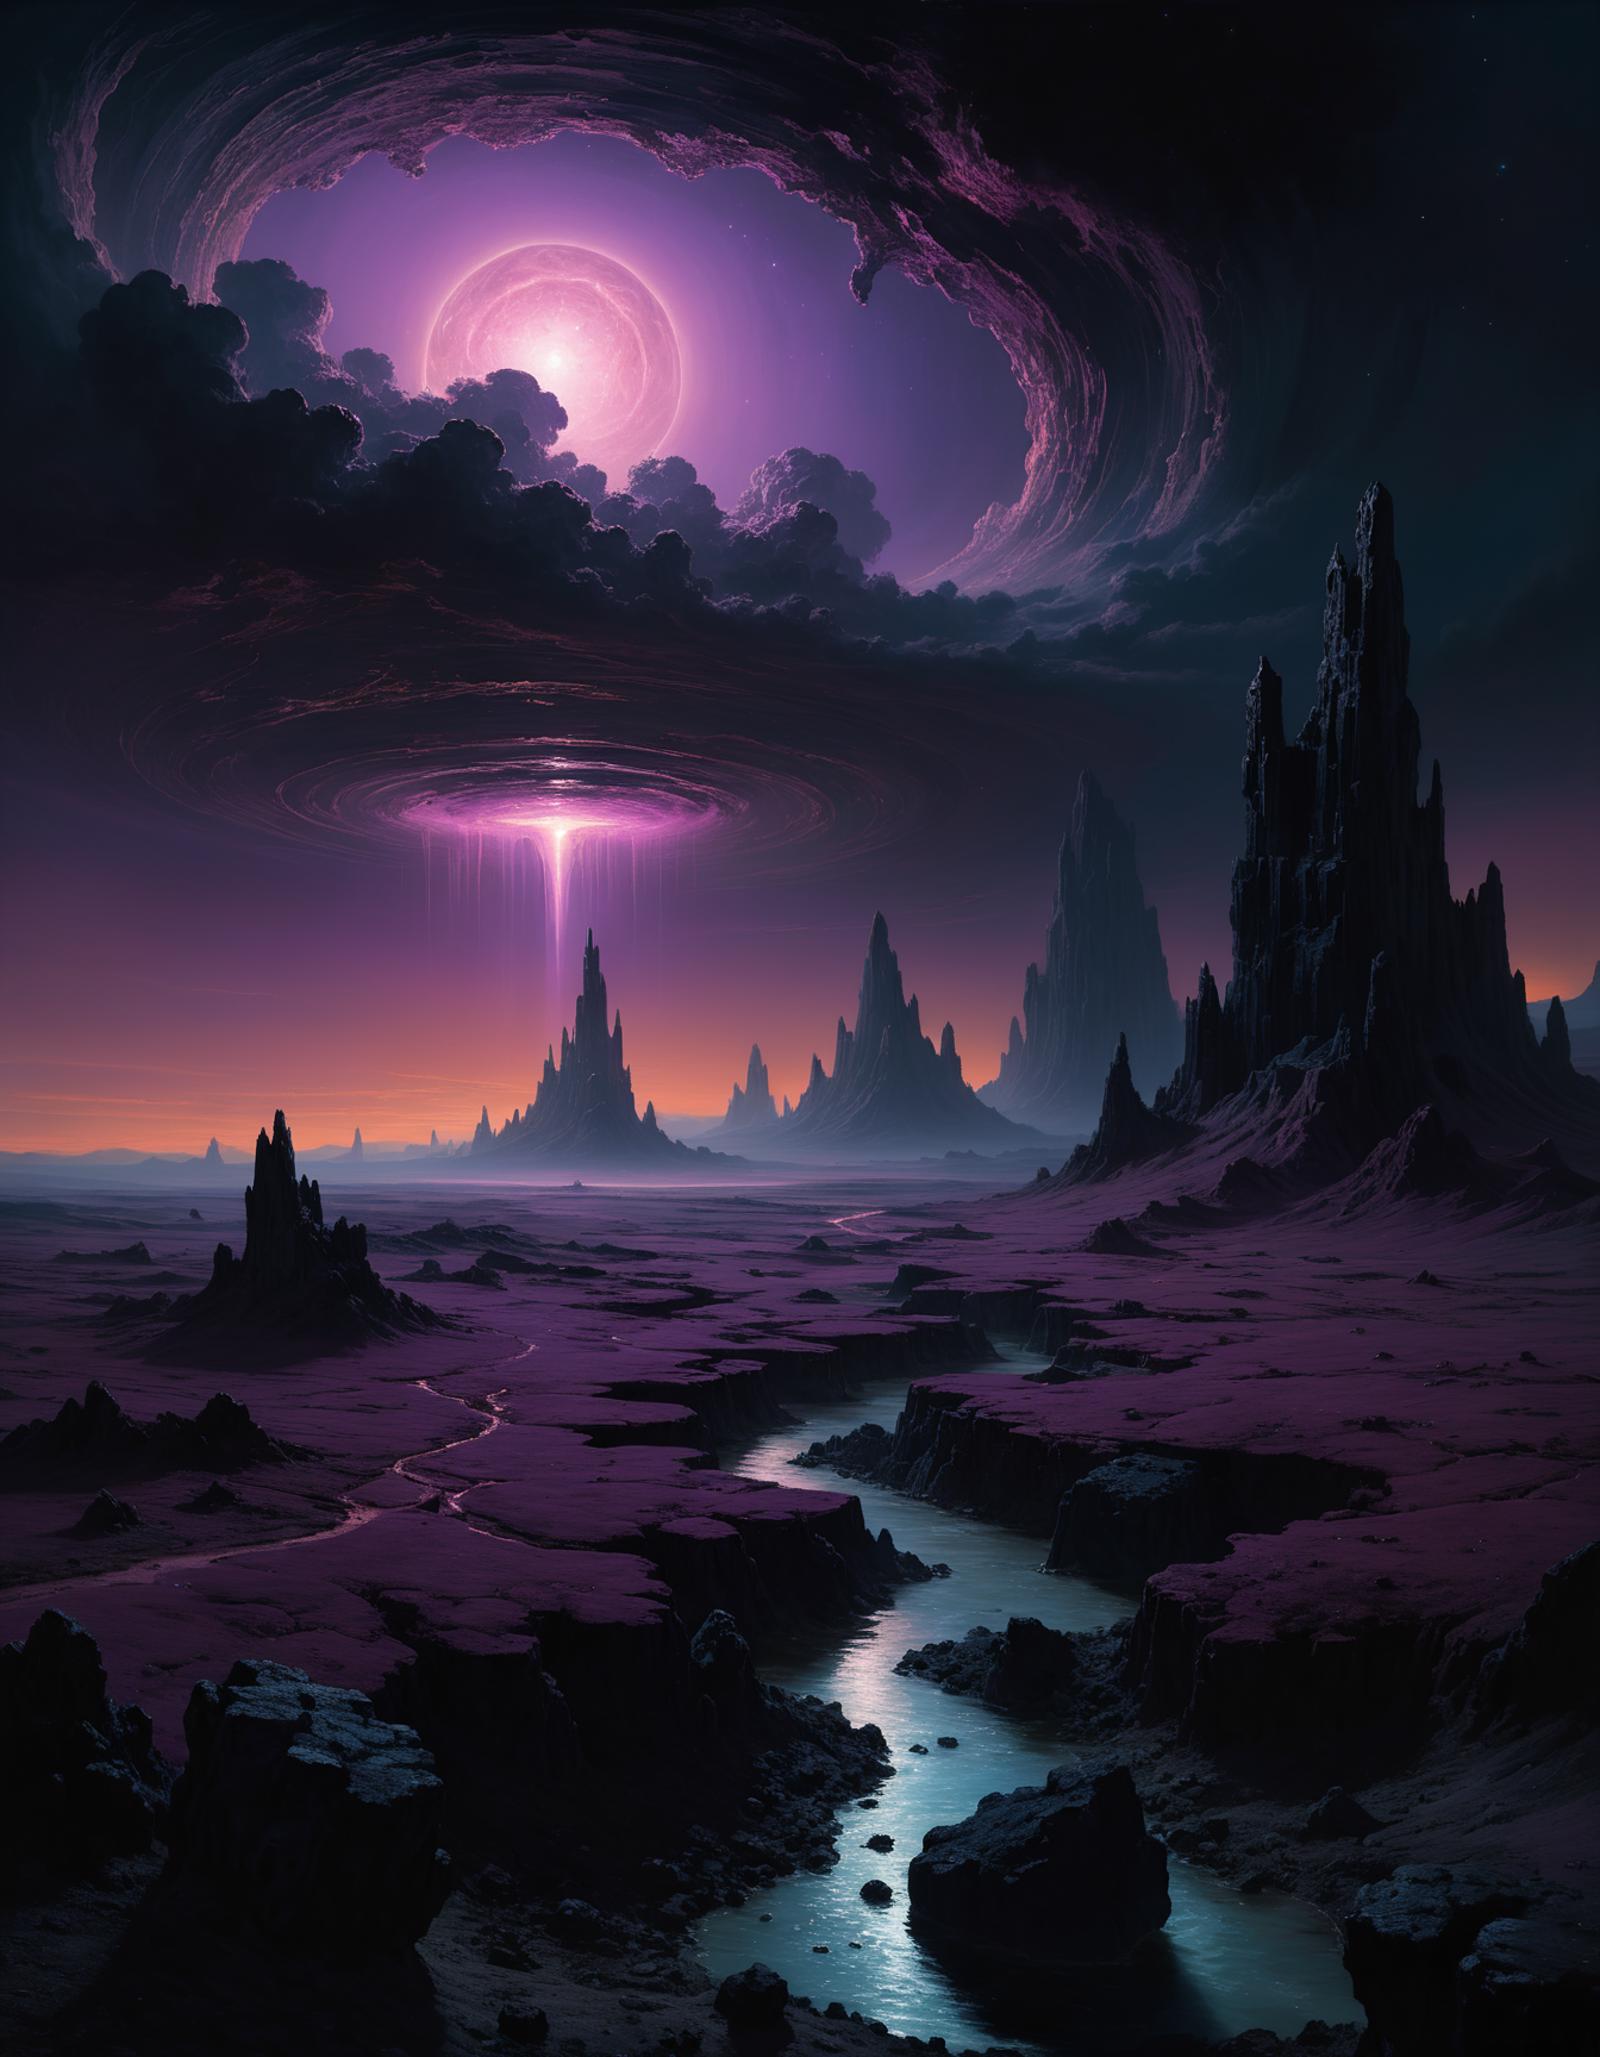 A fantasy artwork featuring purple and black skies, a river, and a unique landscape.